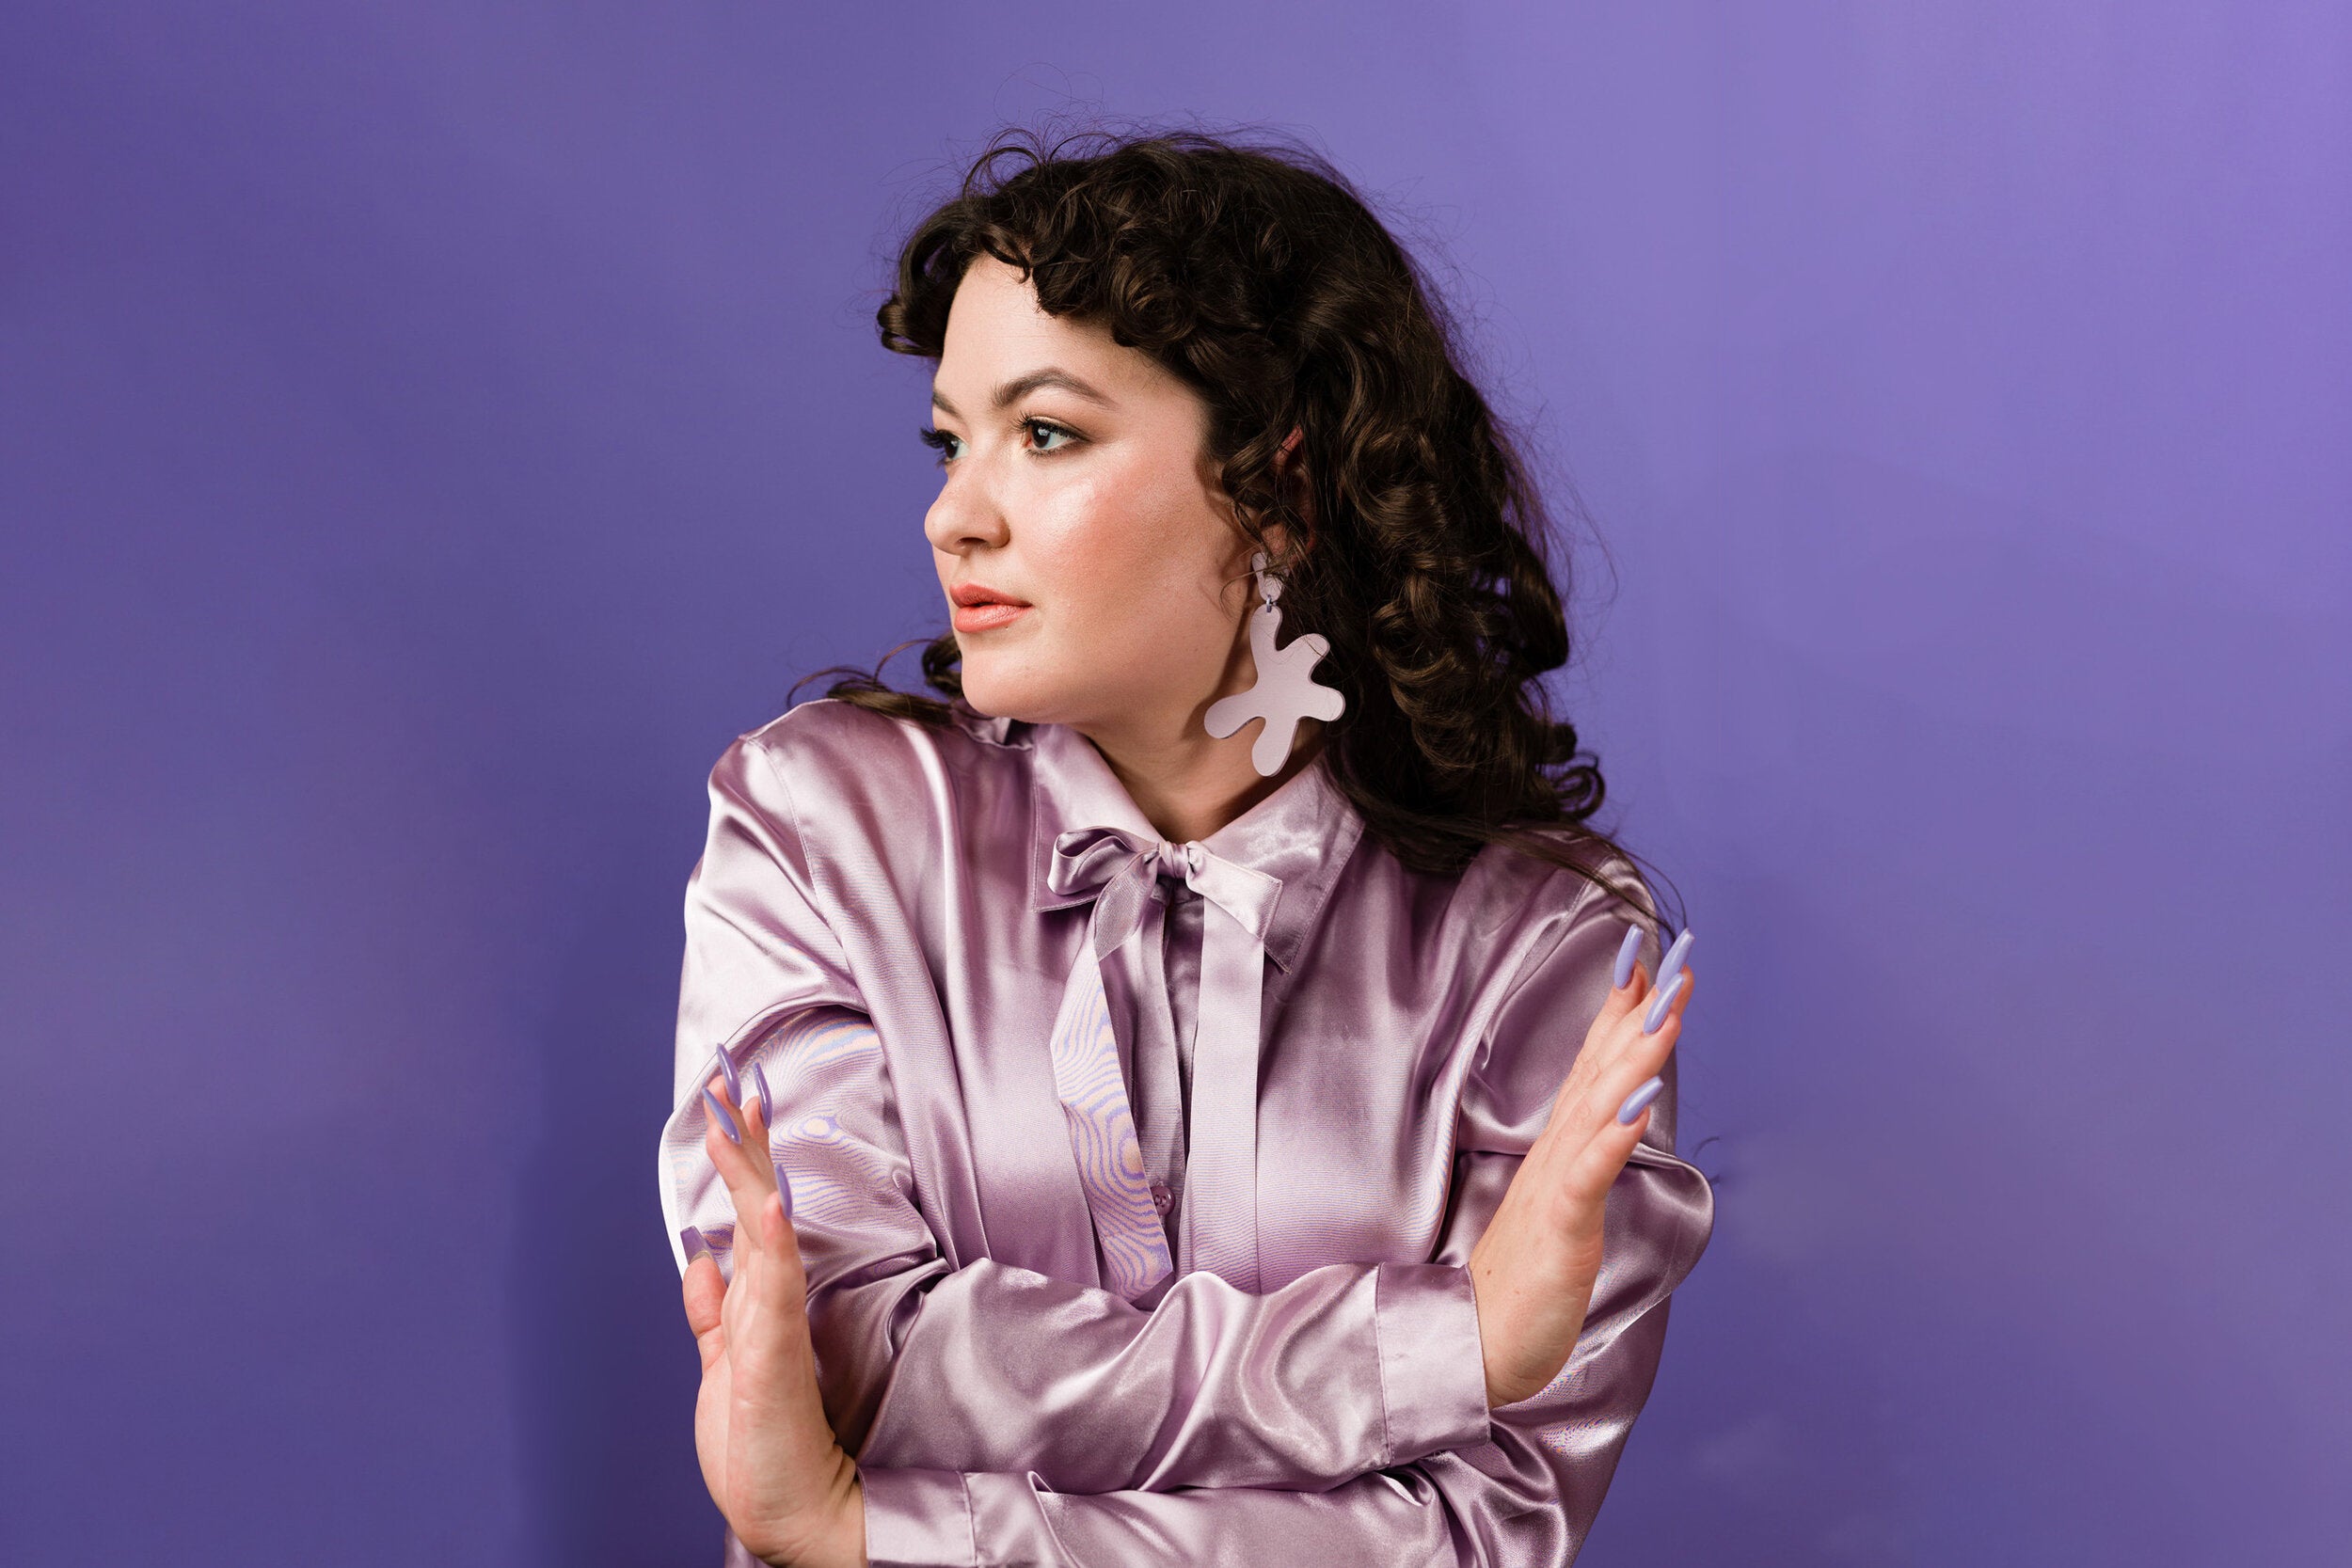 A dark haired young woman poses in front of a purple background wearing a lavender top and matching lavender leather earrings.